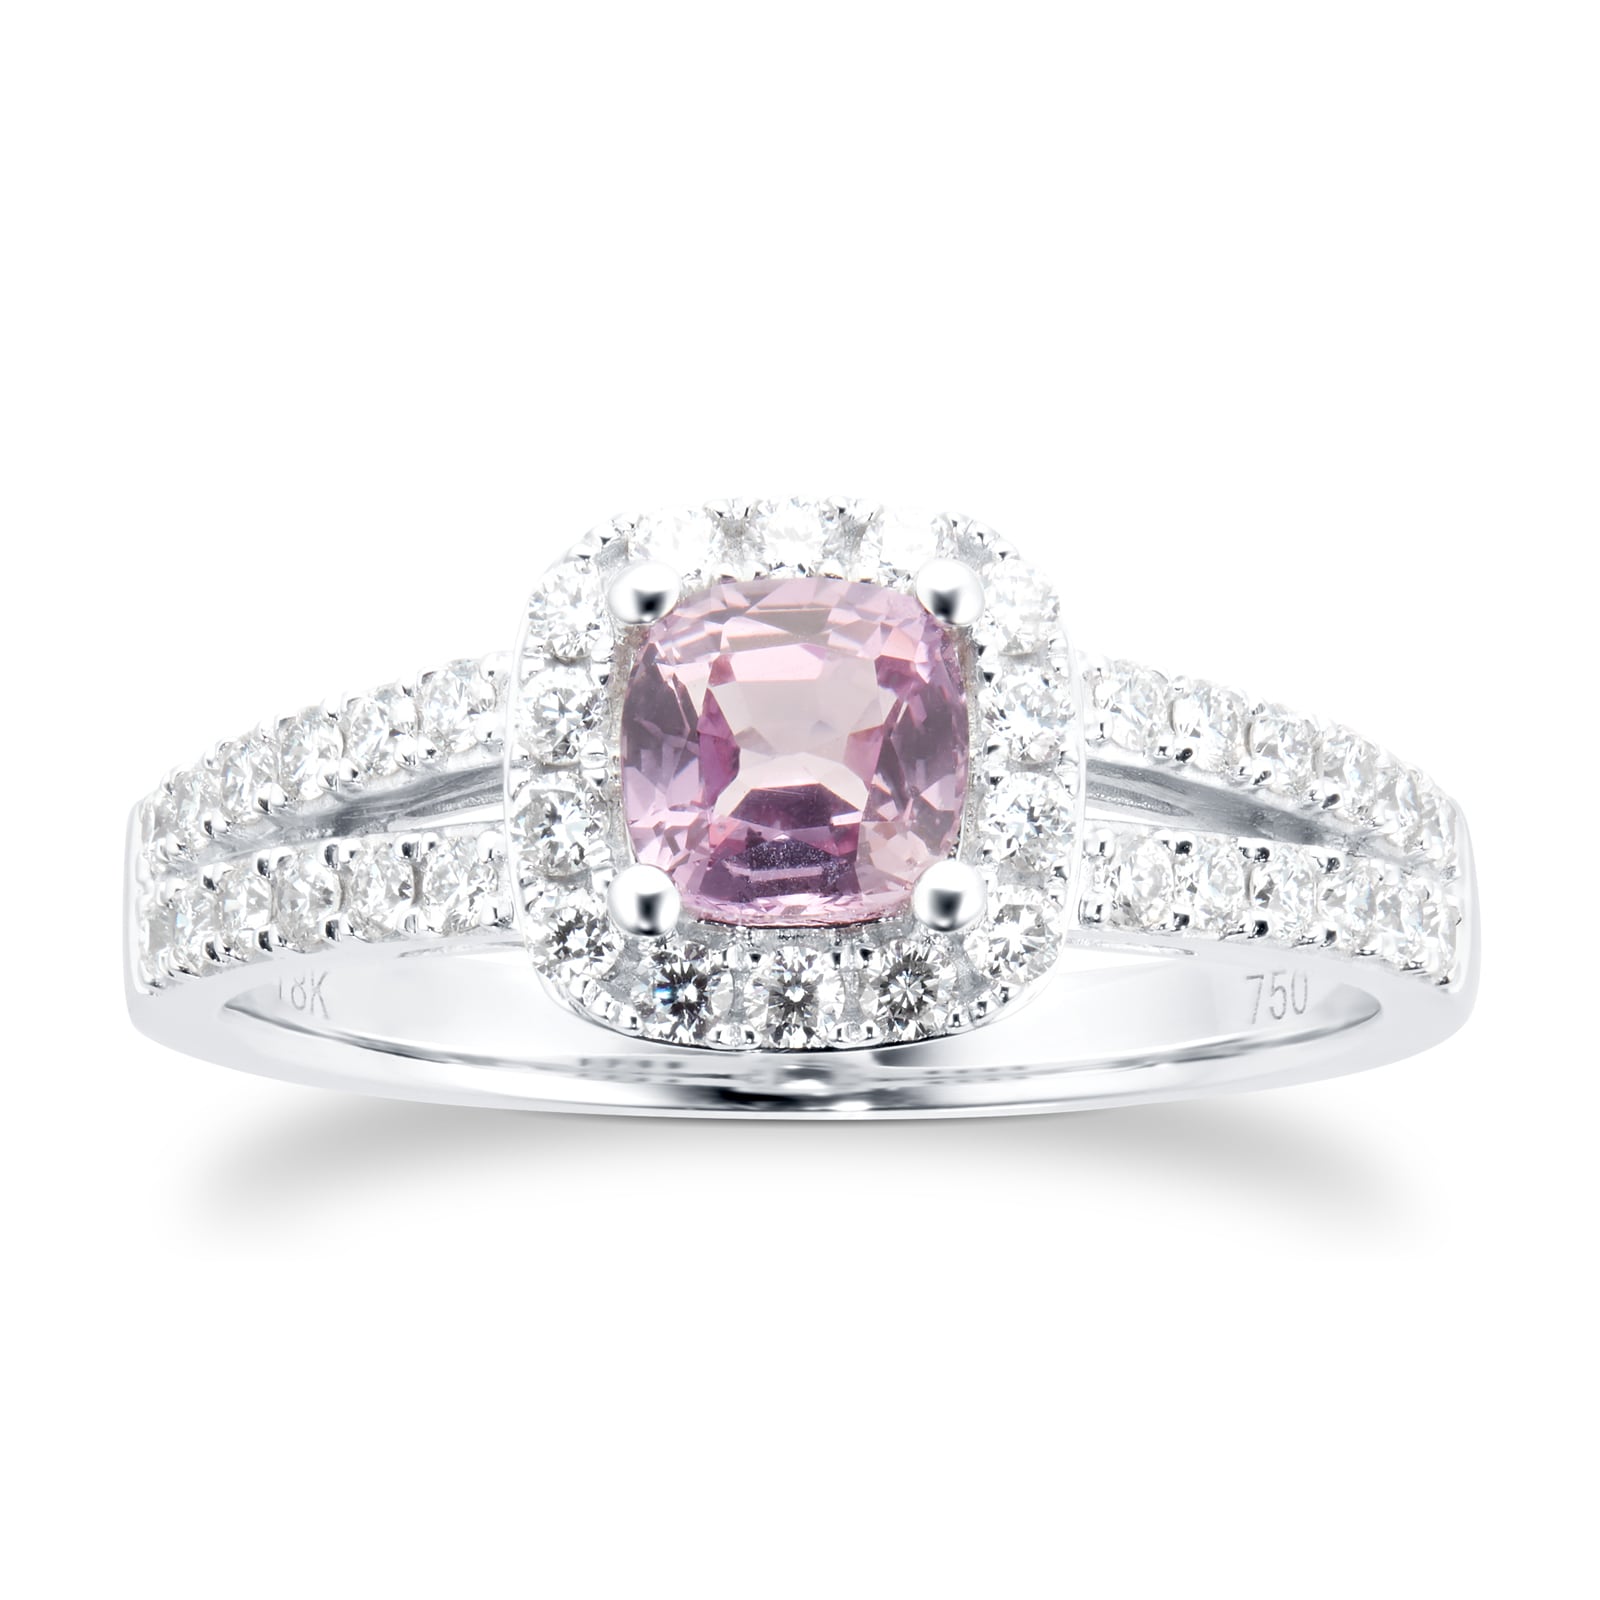 18ct White Gold Pink Sapphire & 0.43cttw Diamond Cushion Cut Halo Ring - Ring Size J